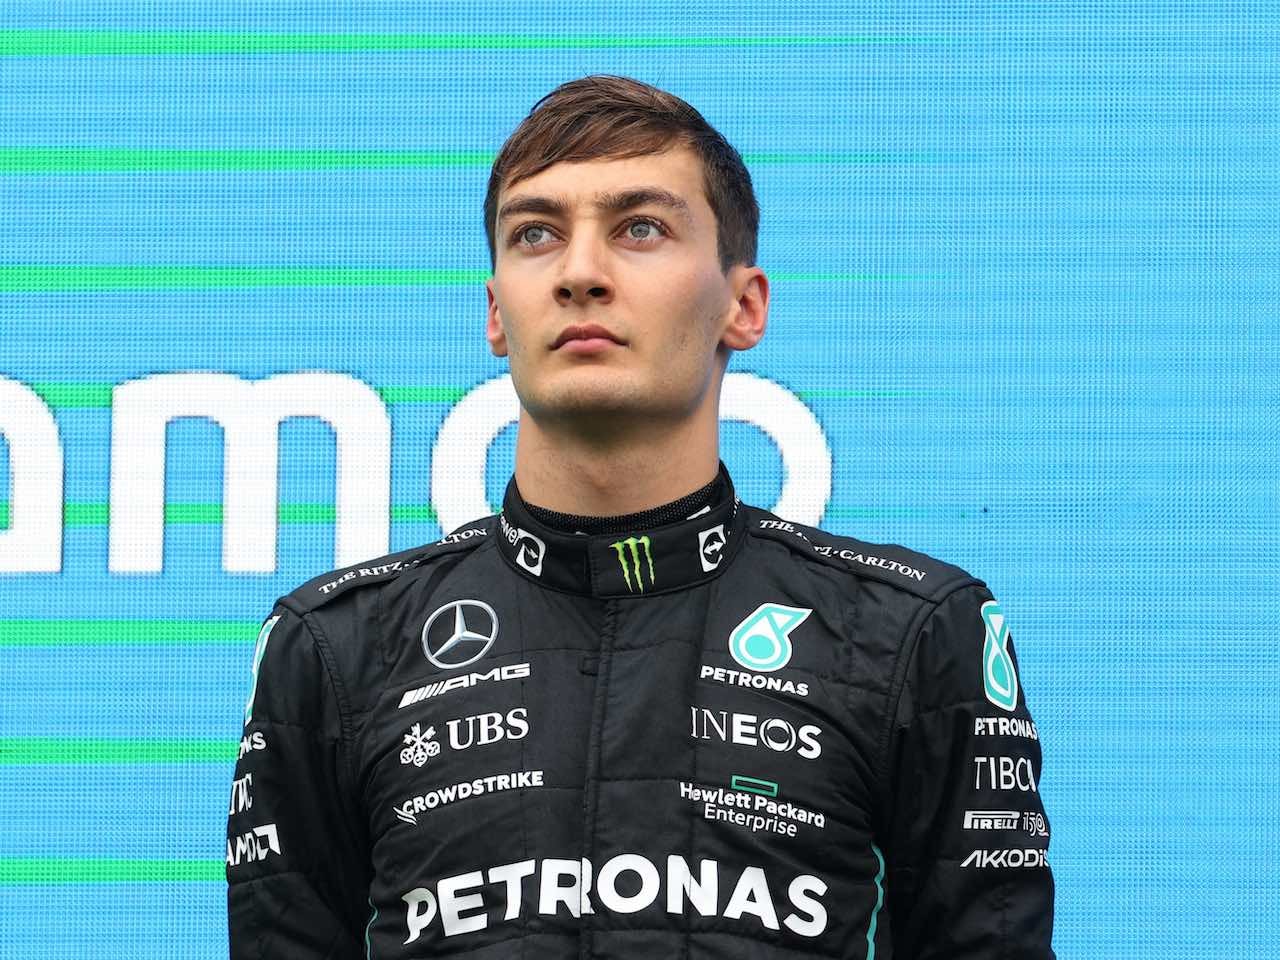 Russell wants Mercedes seat for 'ten years'